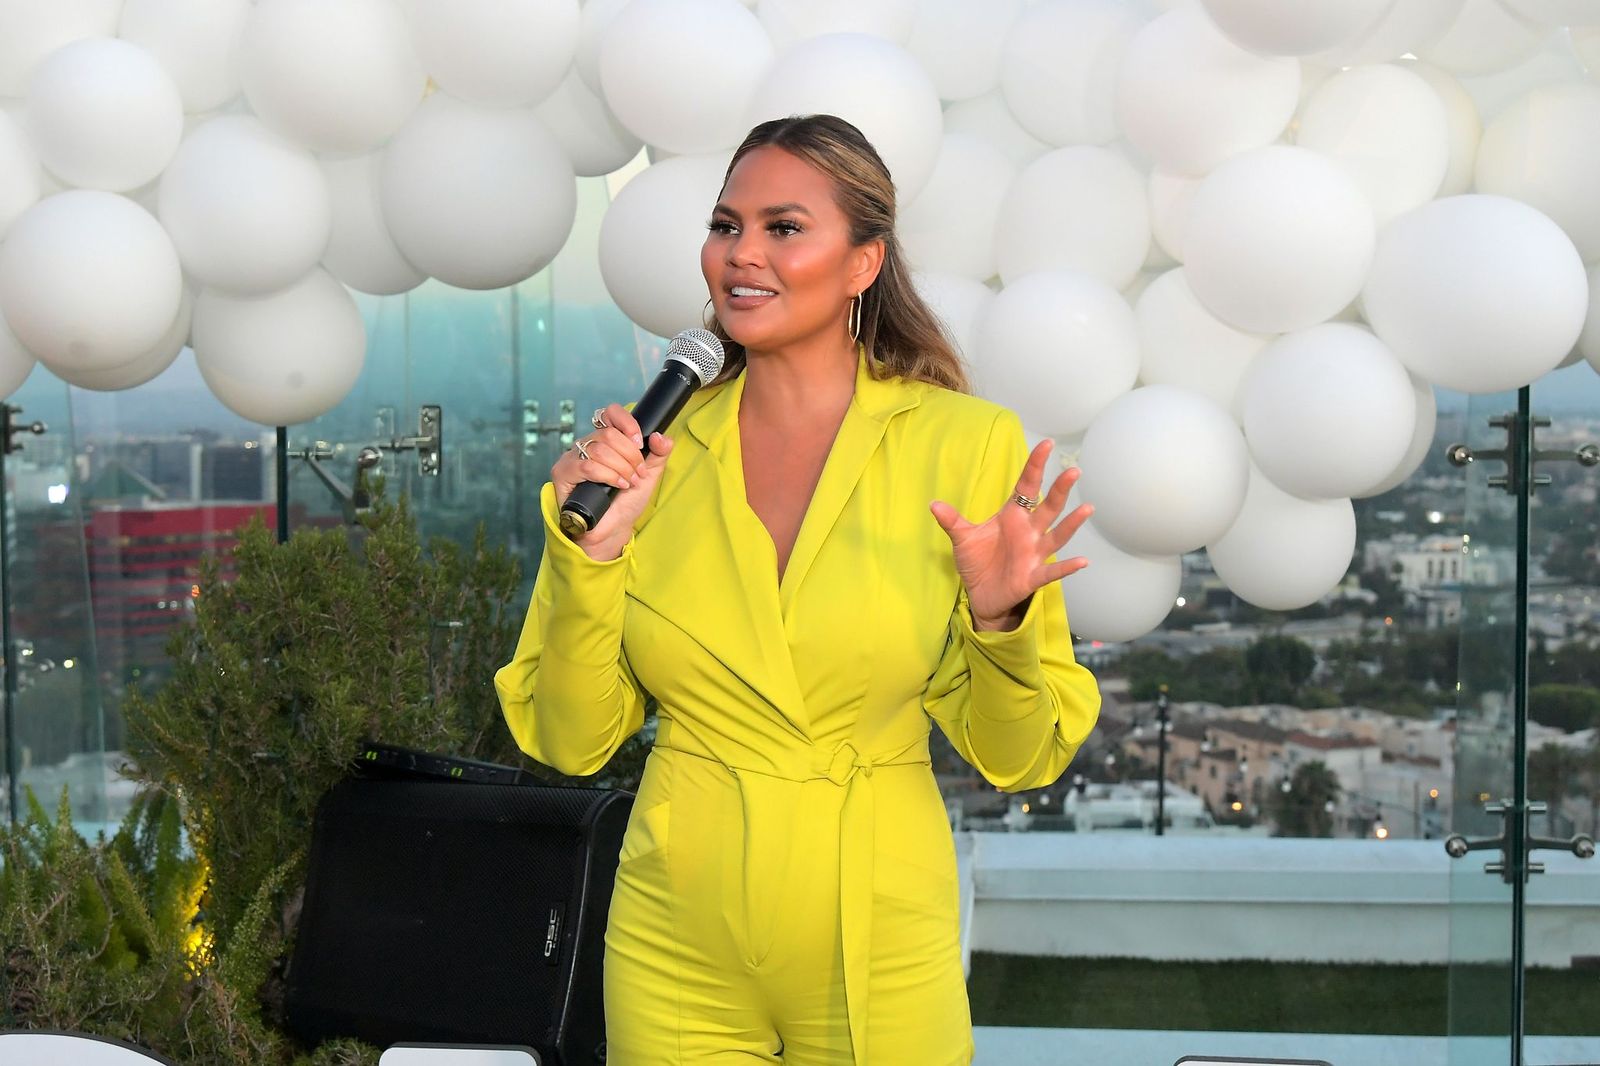 Chrissy Teigen speaks at the Quay x Chrissy Teigen launch event at The London West Hollywood on August 15, 2019 | Photo: Getty Images